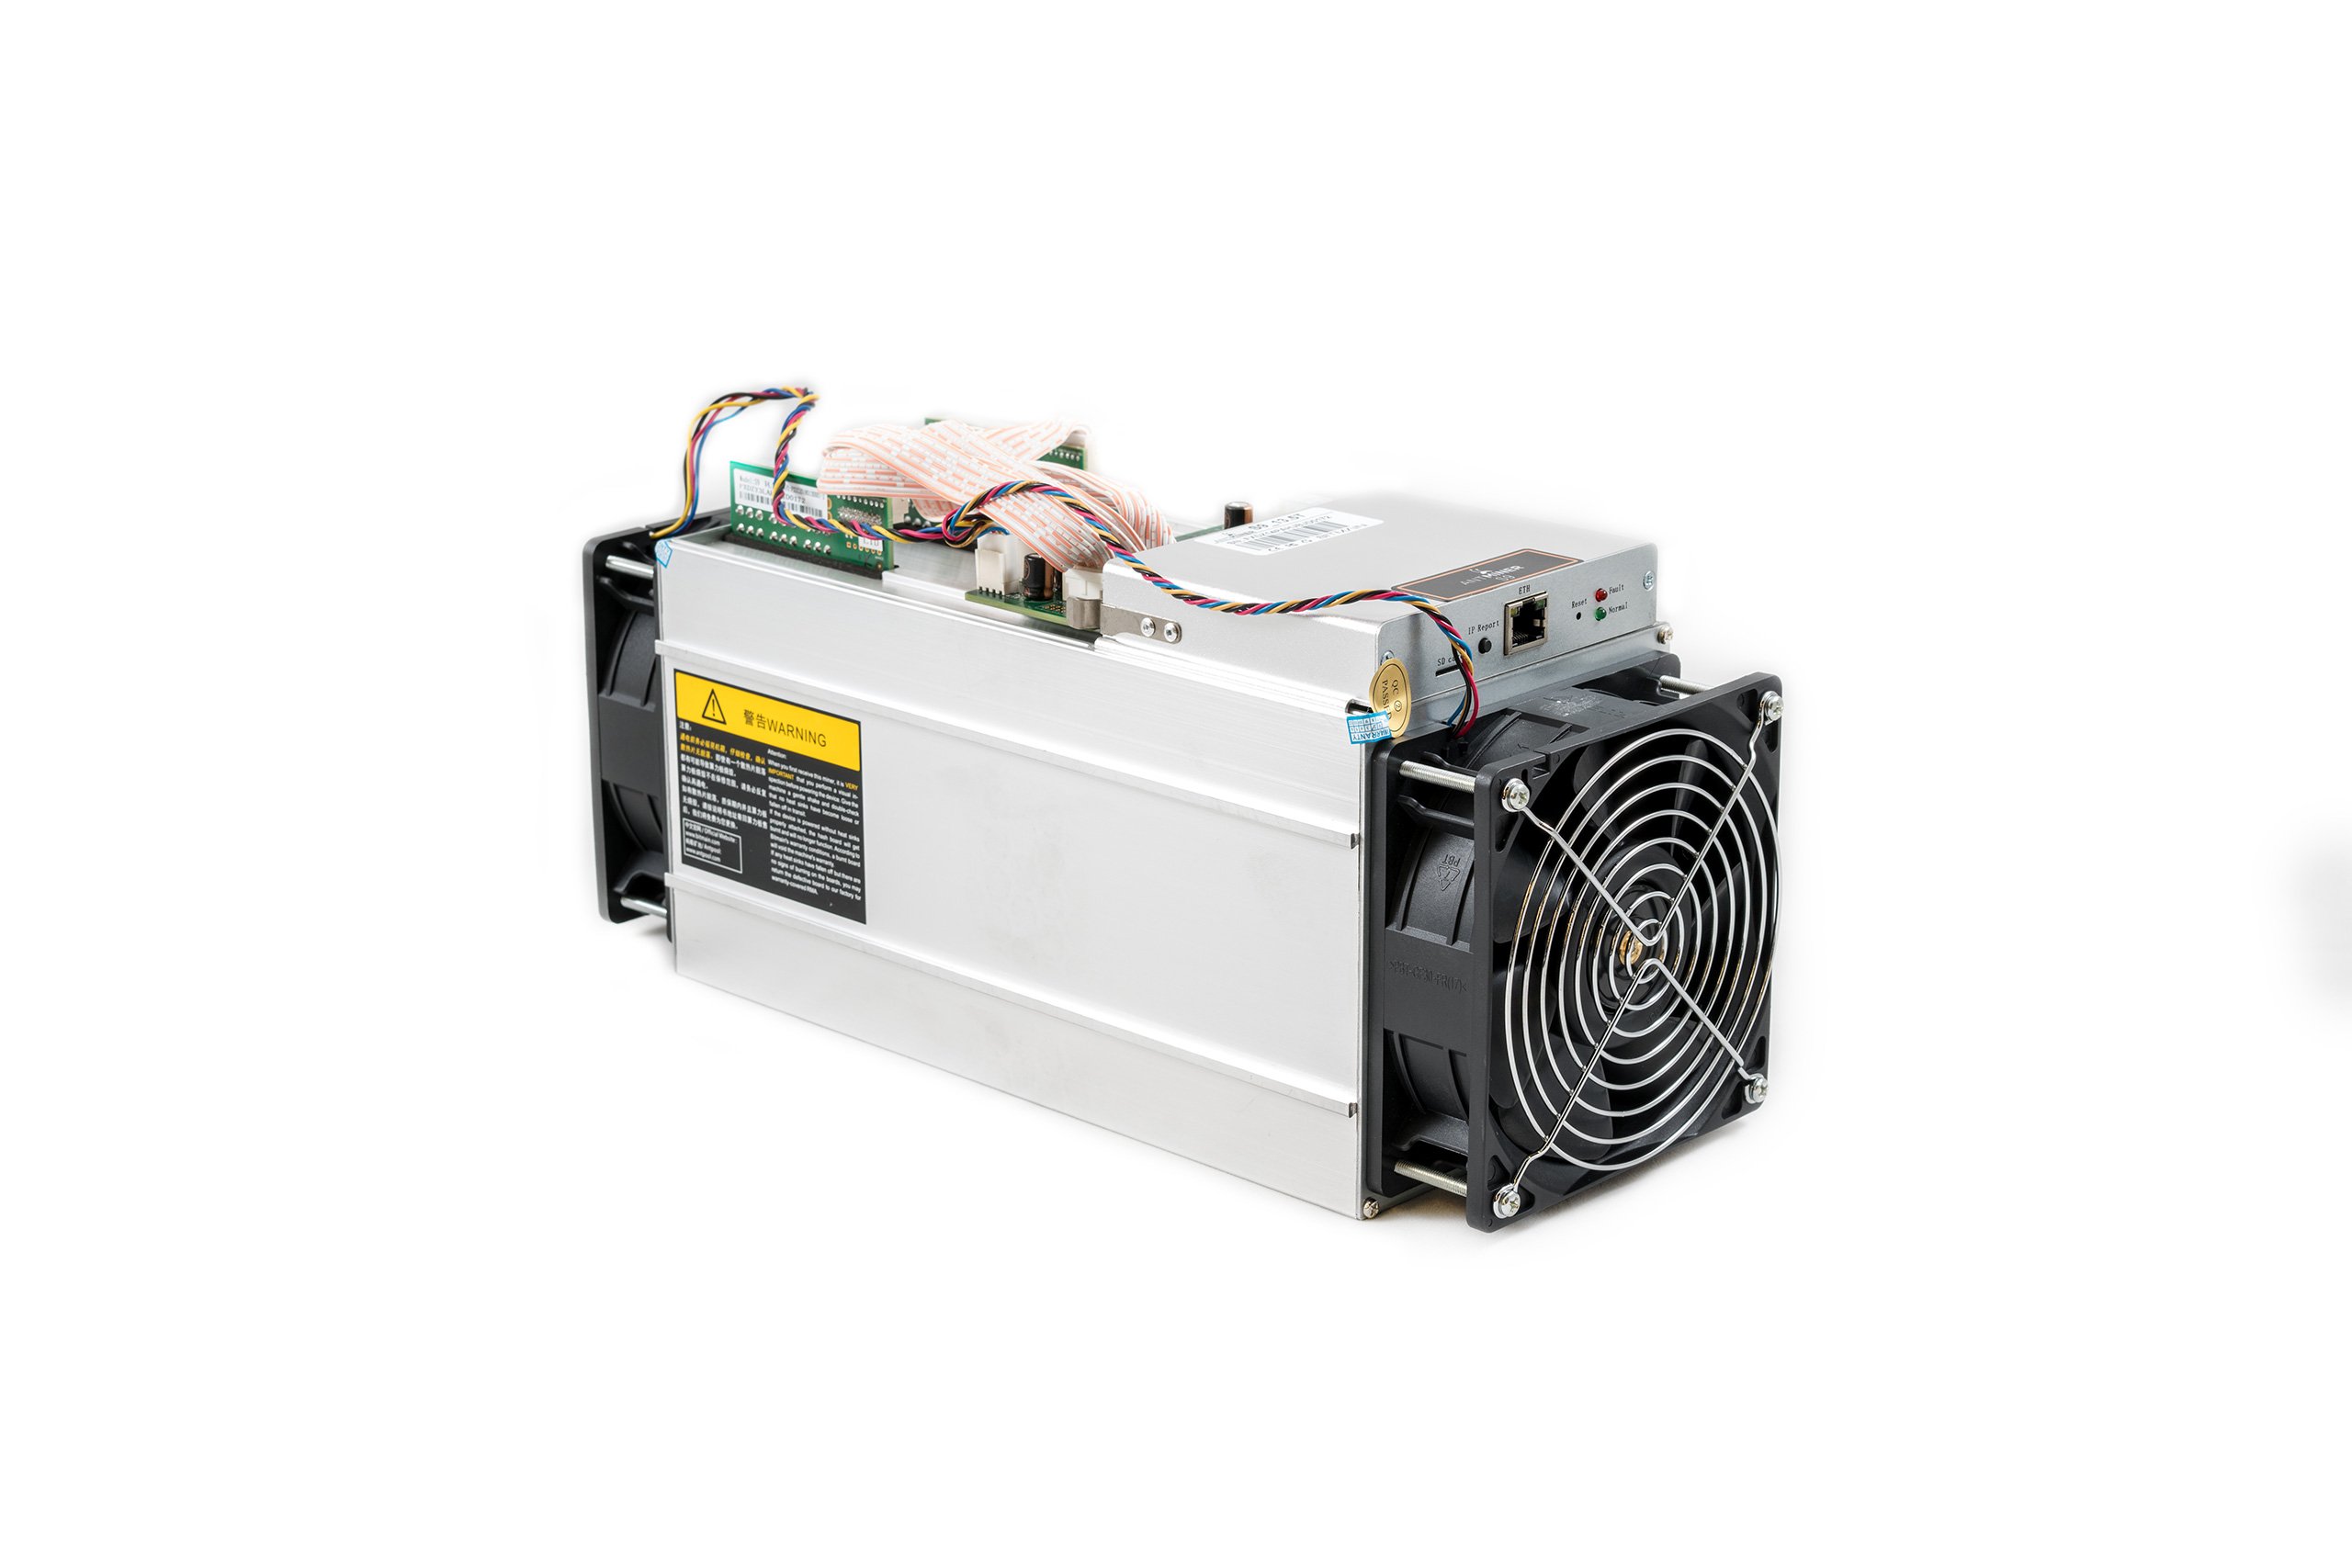 Payback of Bitmain Antminer S9 after halving Bitcoin in 